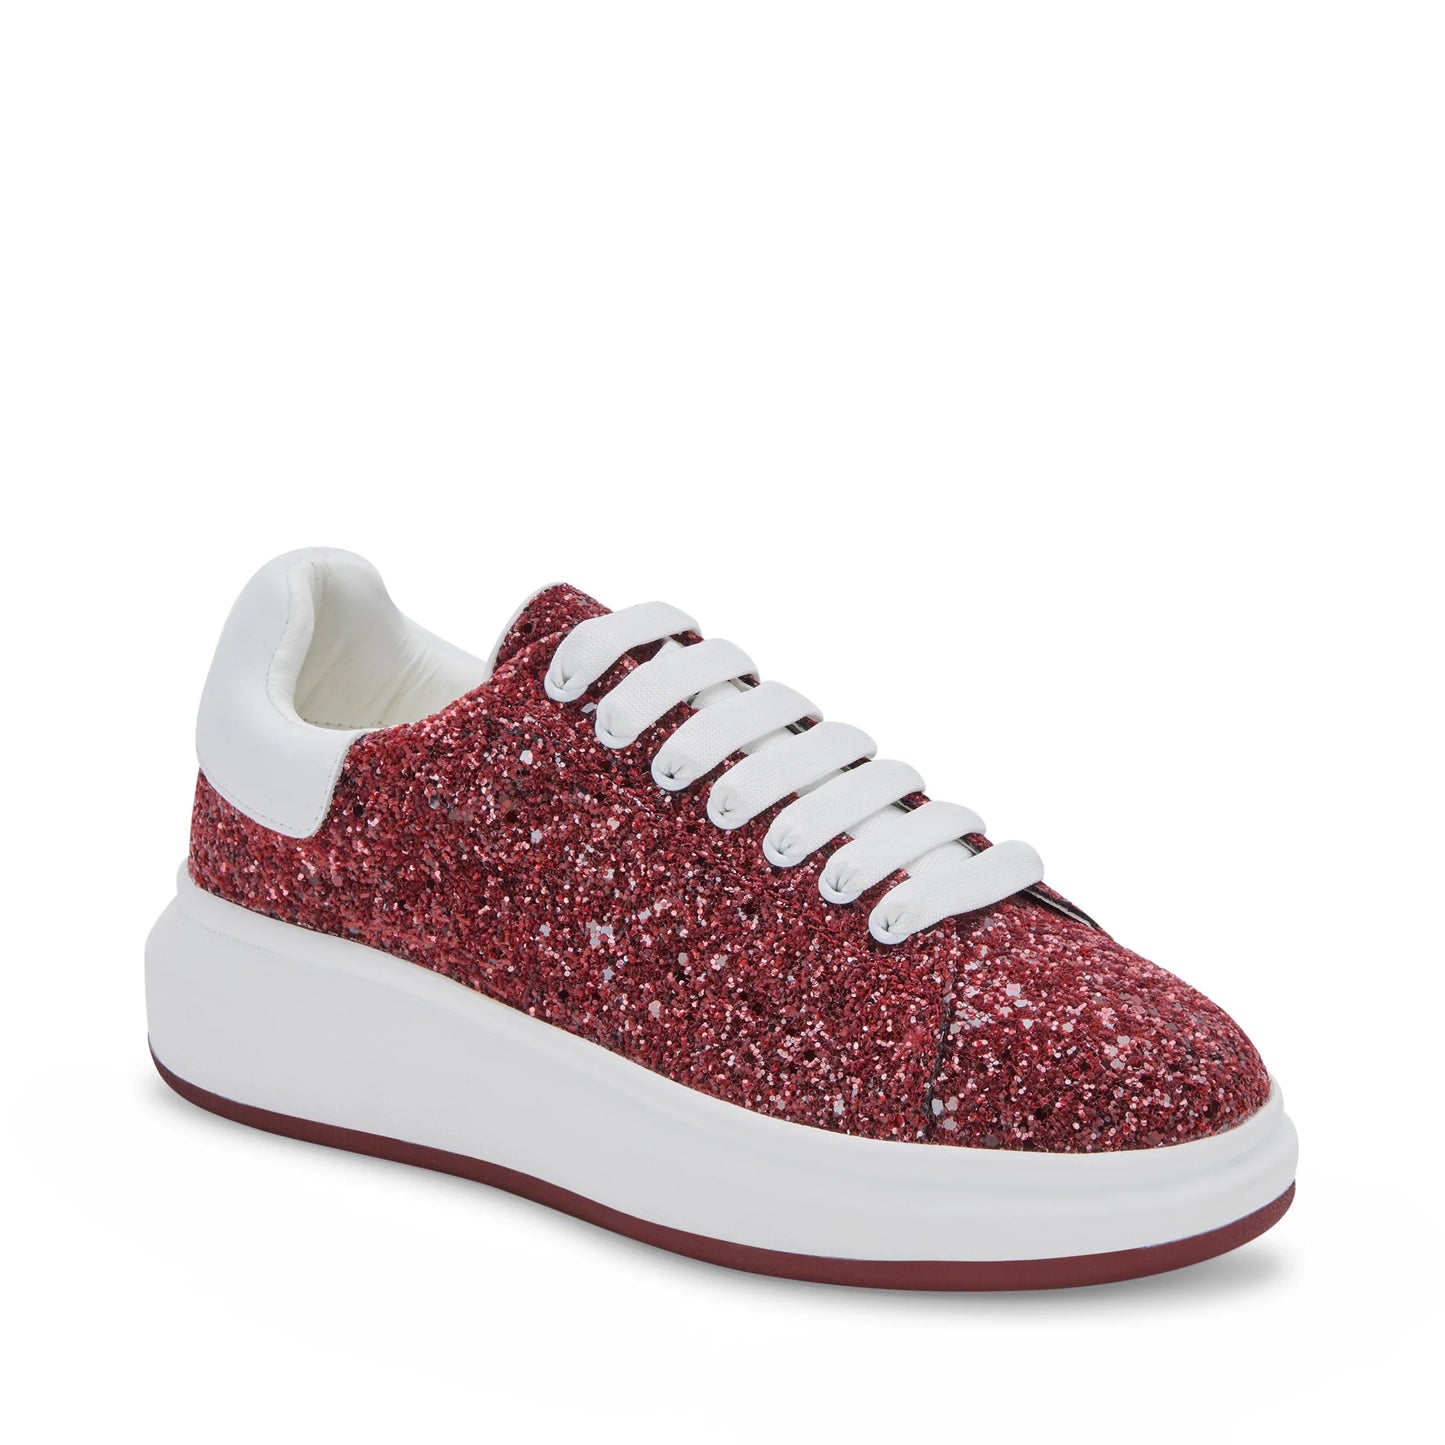 3/4 view of blondo diva shoe with white laces and sole and burgundy sequin body